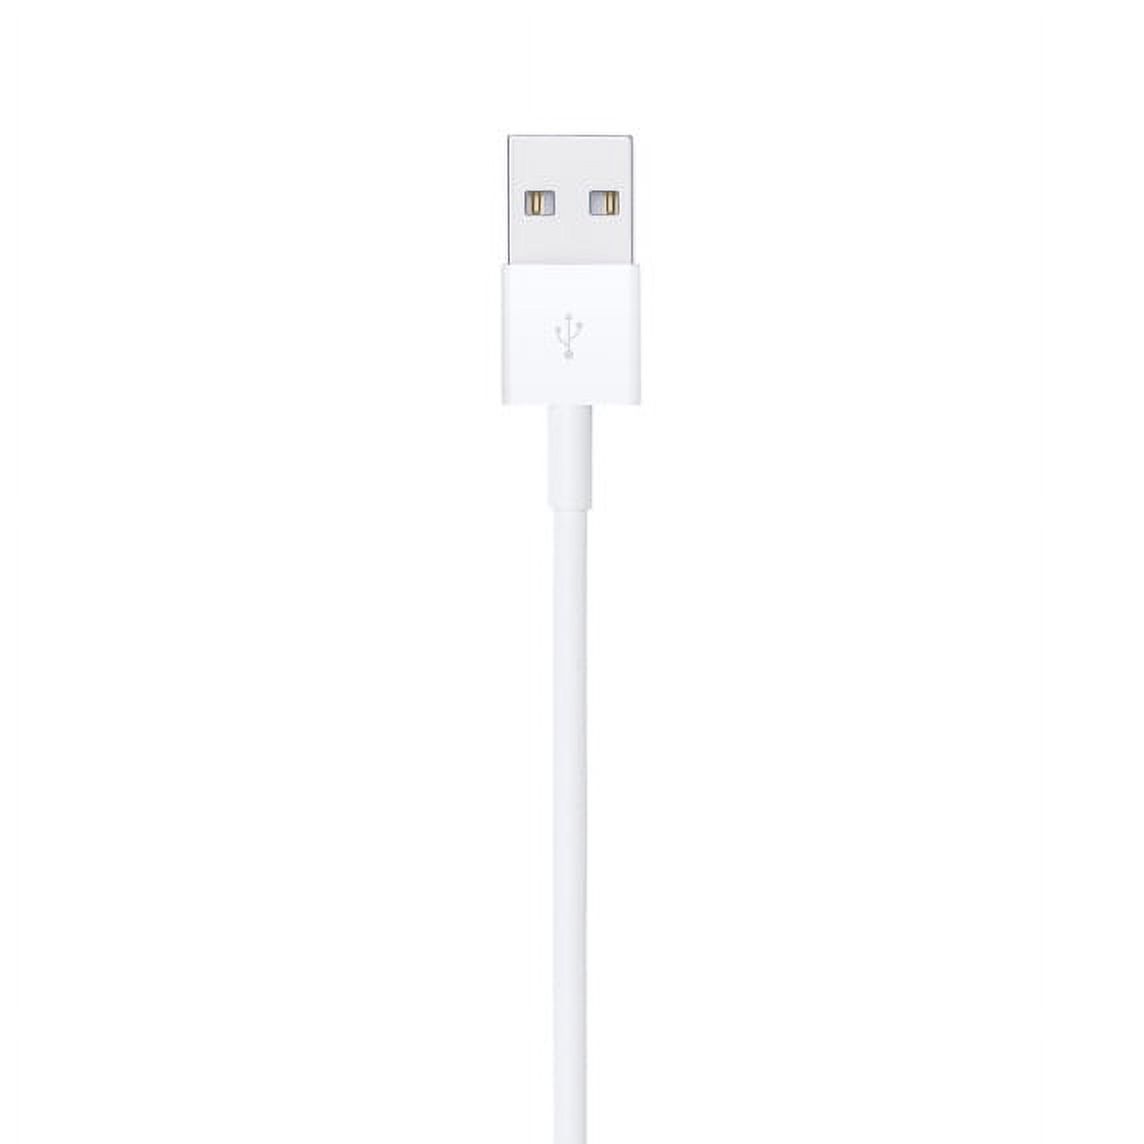 Apple USB-A to Lightning Cable for iPhone, iPad, Airpods, iPod - 6.6ft or 2m - image 4 of 4